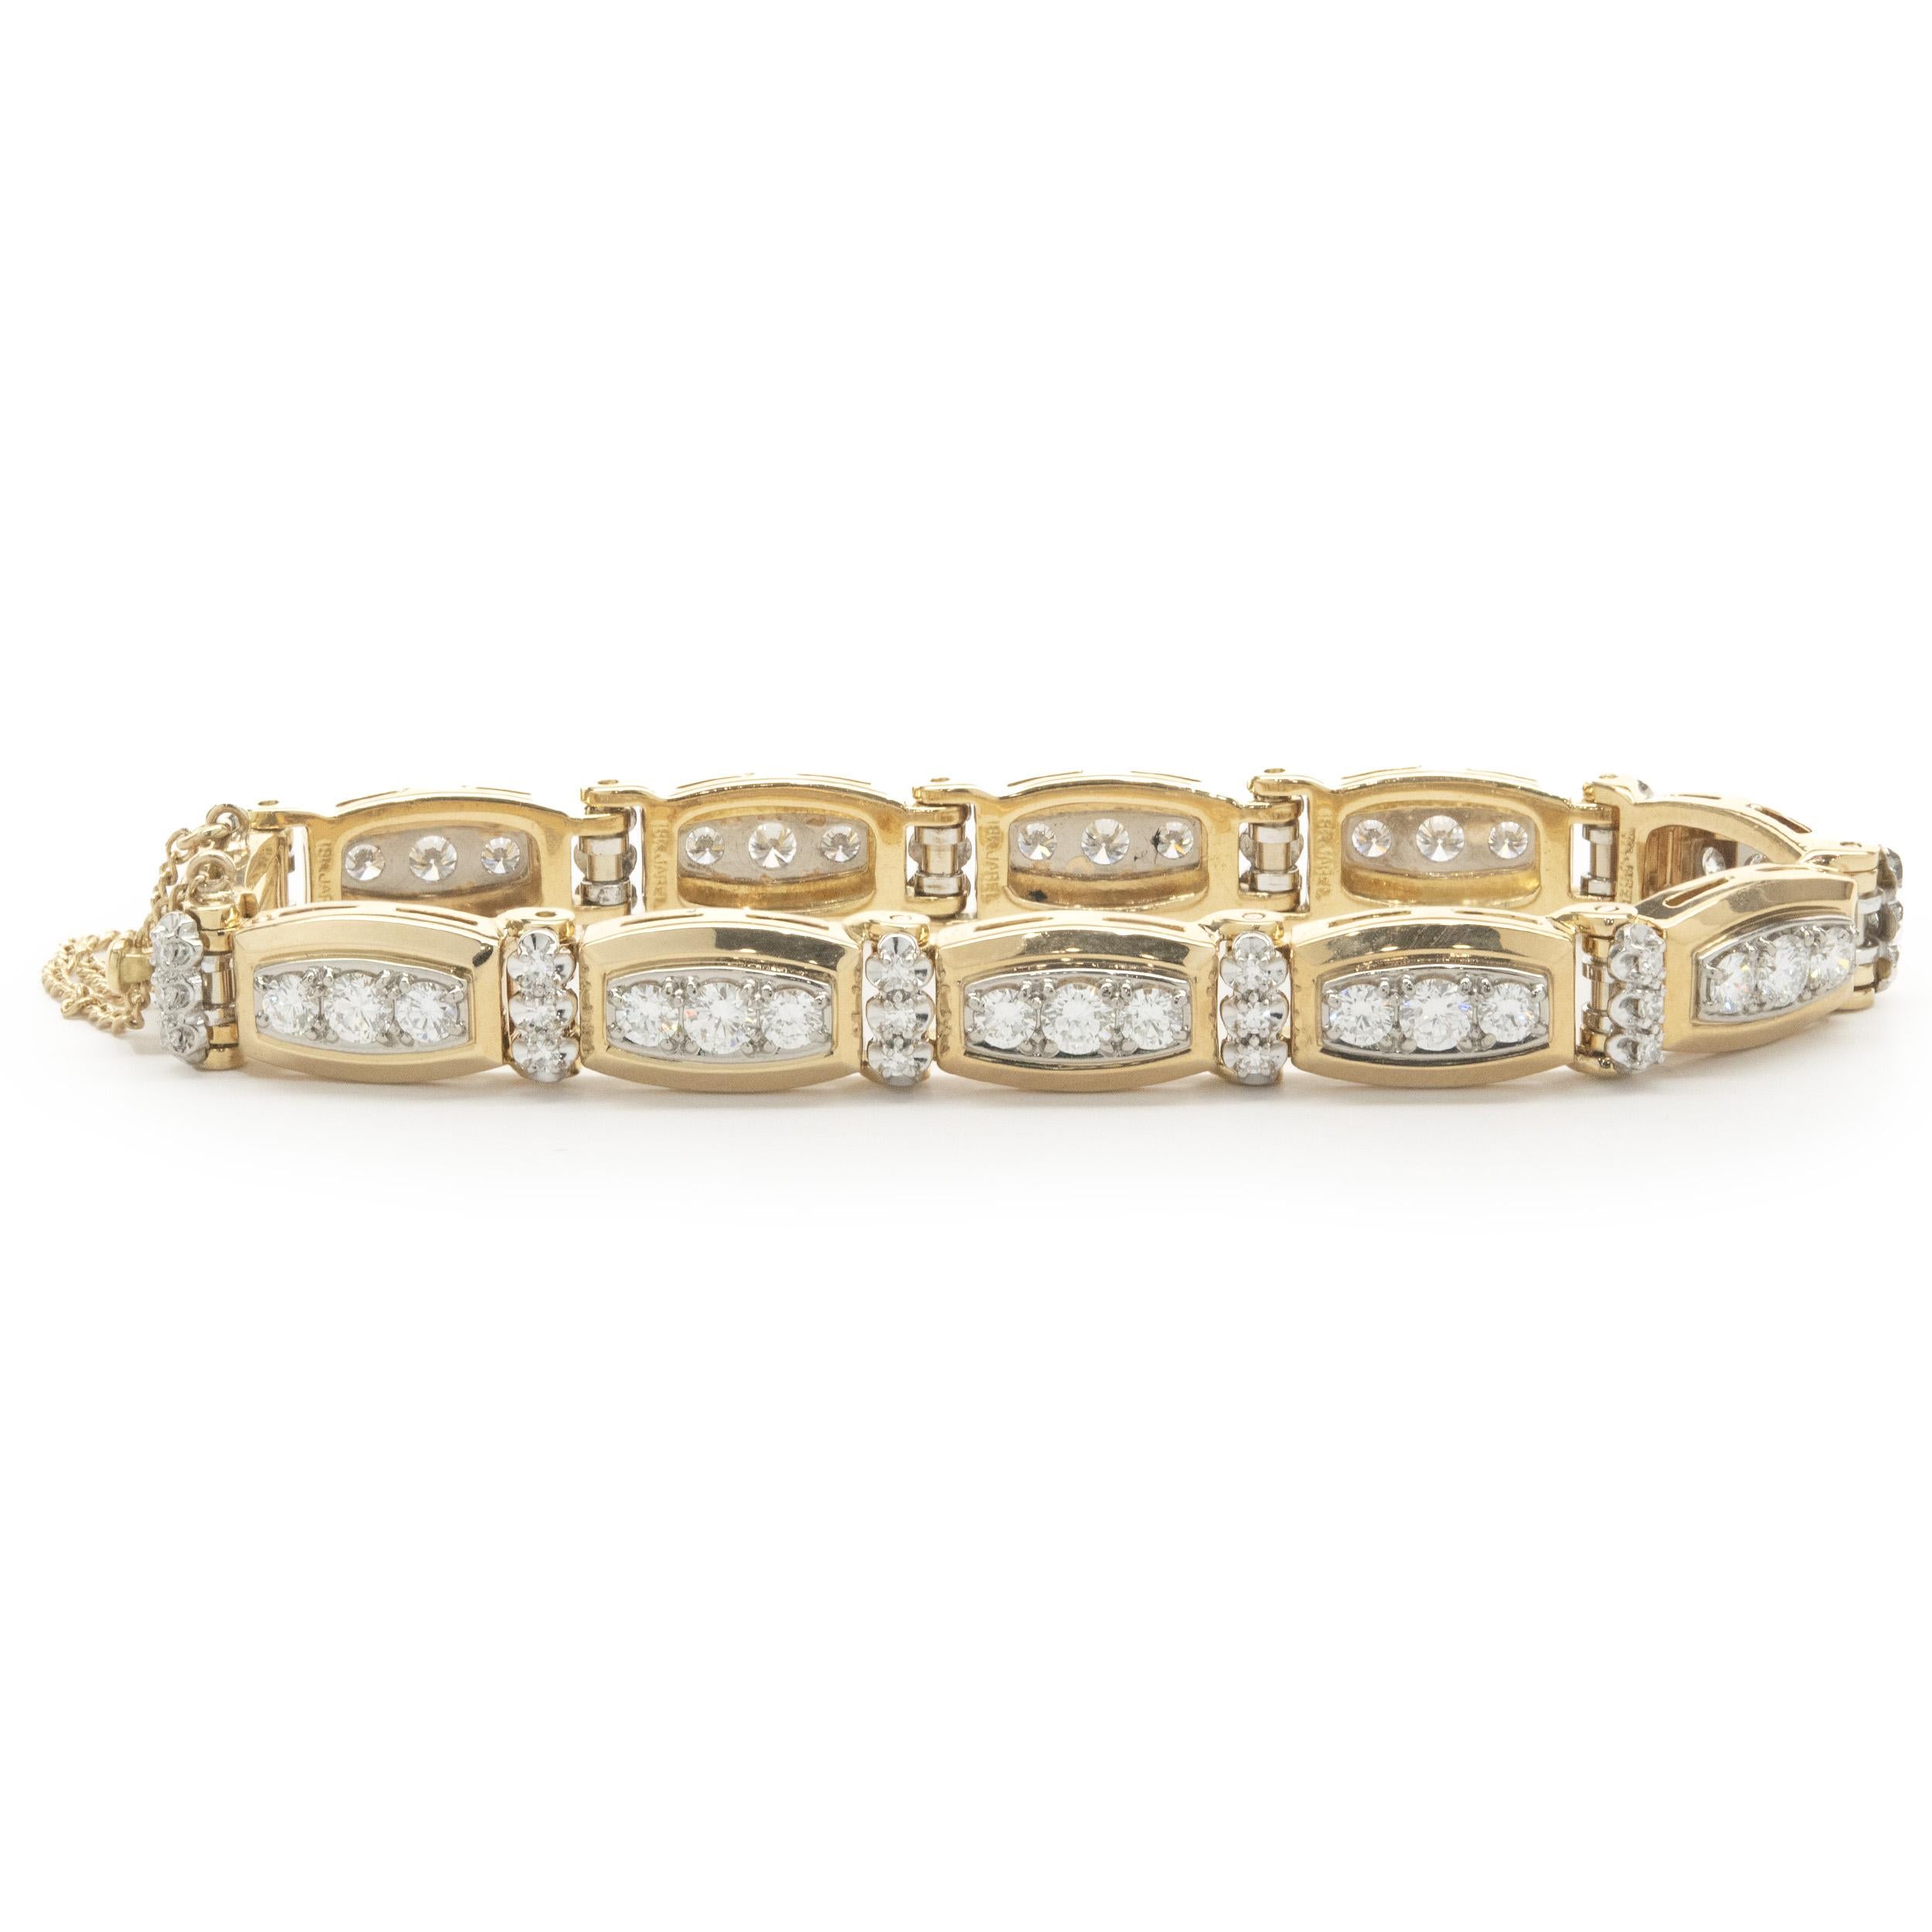 Designer: custom
Material: 18K yellow gold
Diamonds: 66 round brilliant cut = 3.14cttw
Color: G
Clarity: SI1
Dimensions: bracelet will fit up to a 7-inch wrist
Weight: 29.73 grams